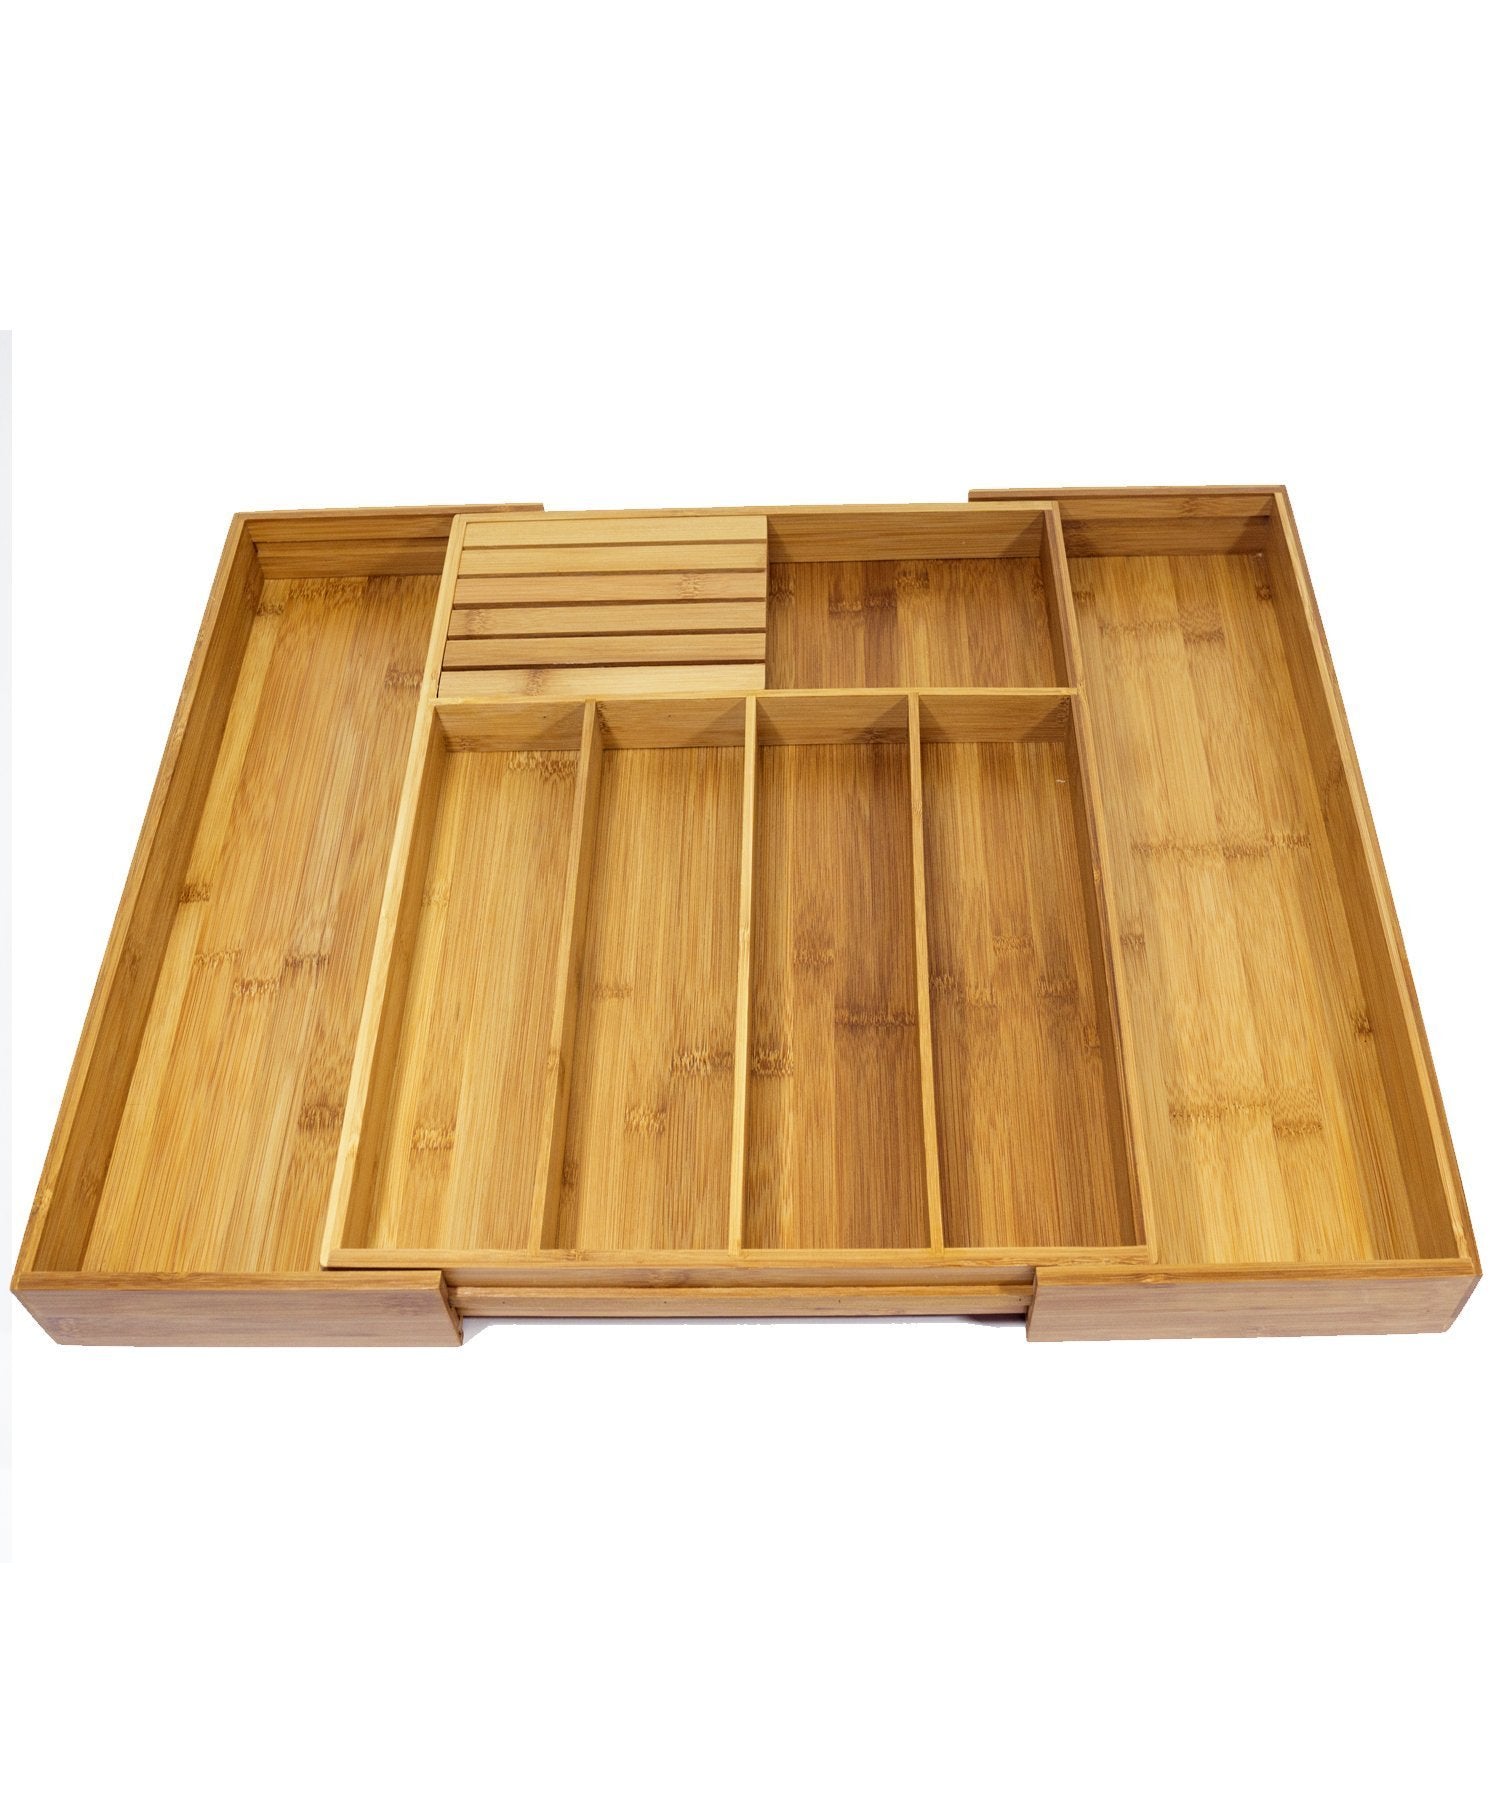 Top rated expandable bamboo kitchen drawer organizer w built in solid bamboo knife block 100 eco friendly adjustable bamboo kitchen utensil cutlery tray